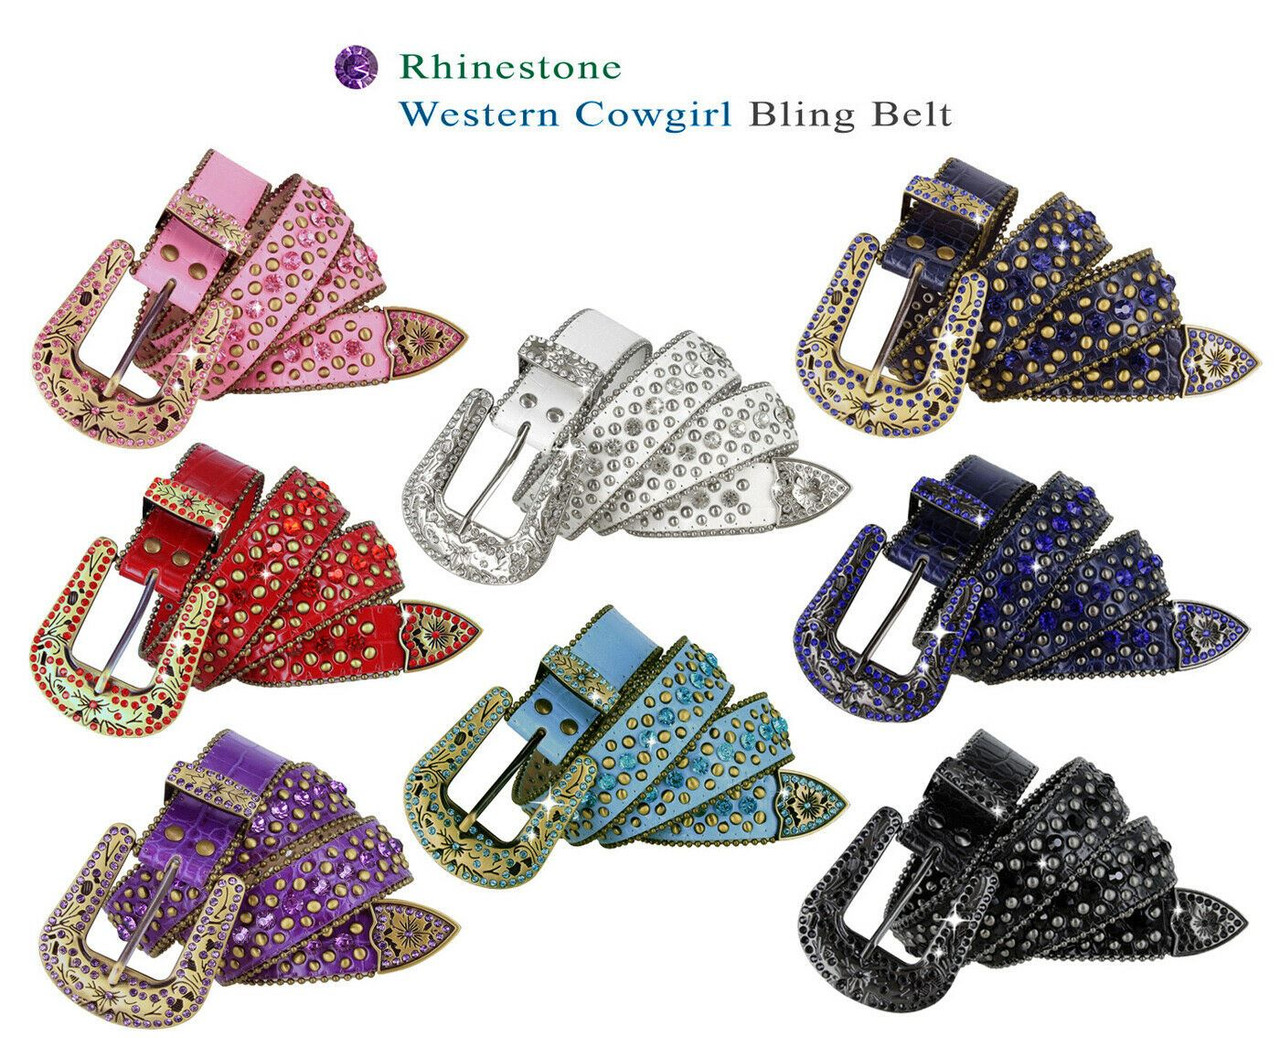 L&M Bling - *** BLING RHINESTONE PAGEANT BELTS *** Don't